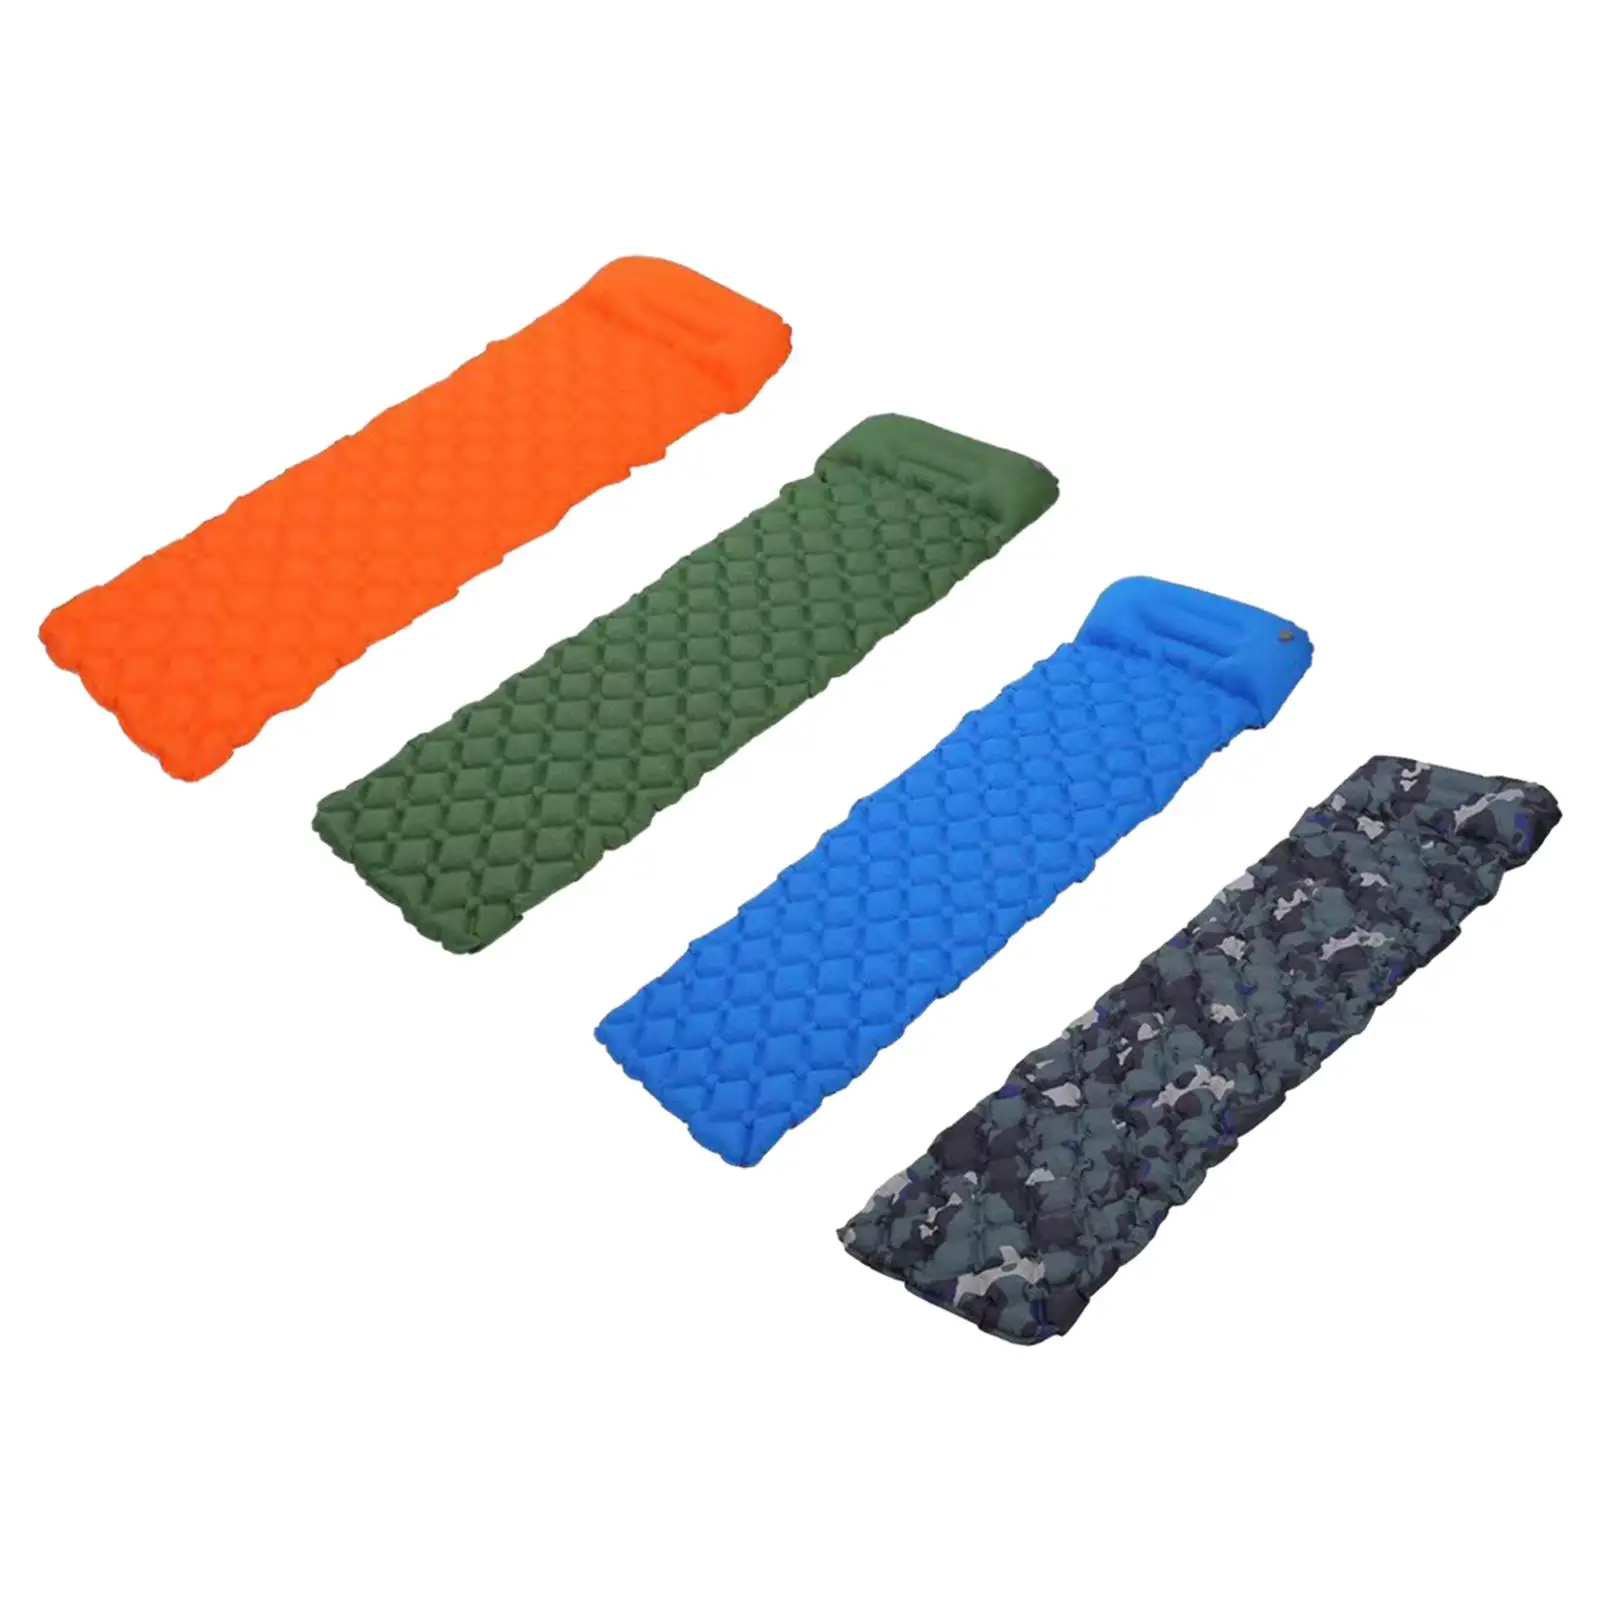 

Camping Sleeping Pad with Pillow Portable Camping Mat Camping Mattress Ultralight for Hiking Backpacking Tent Outdoor Traveling